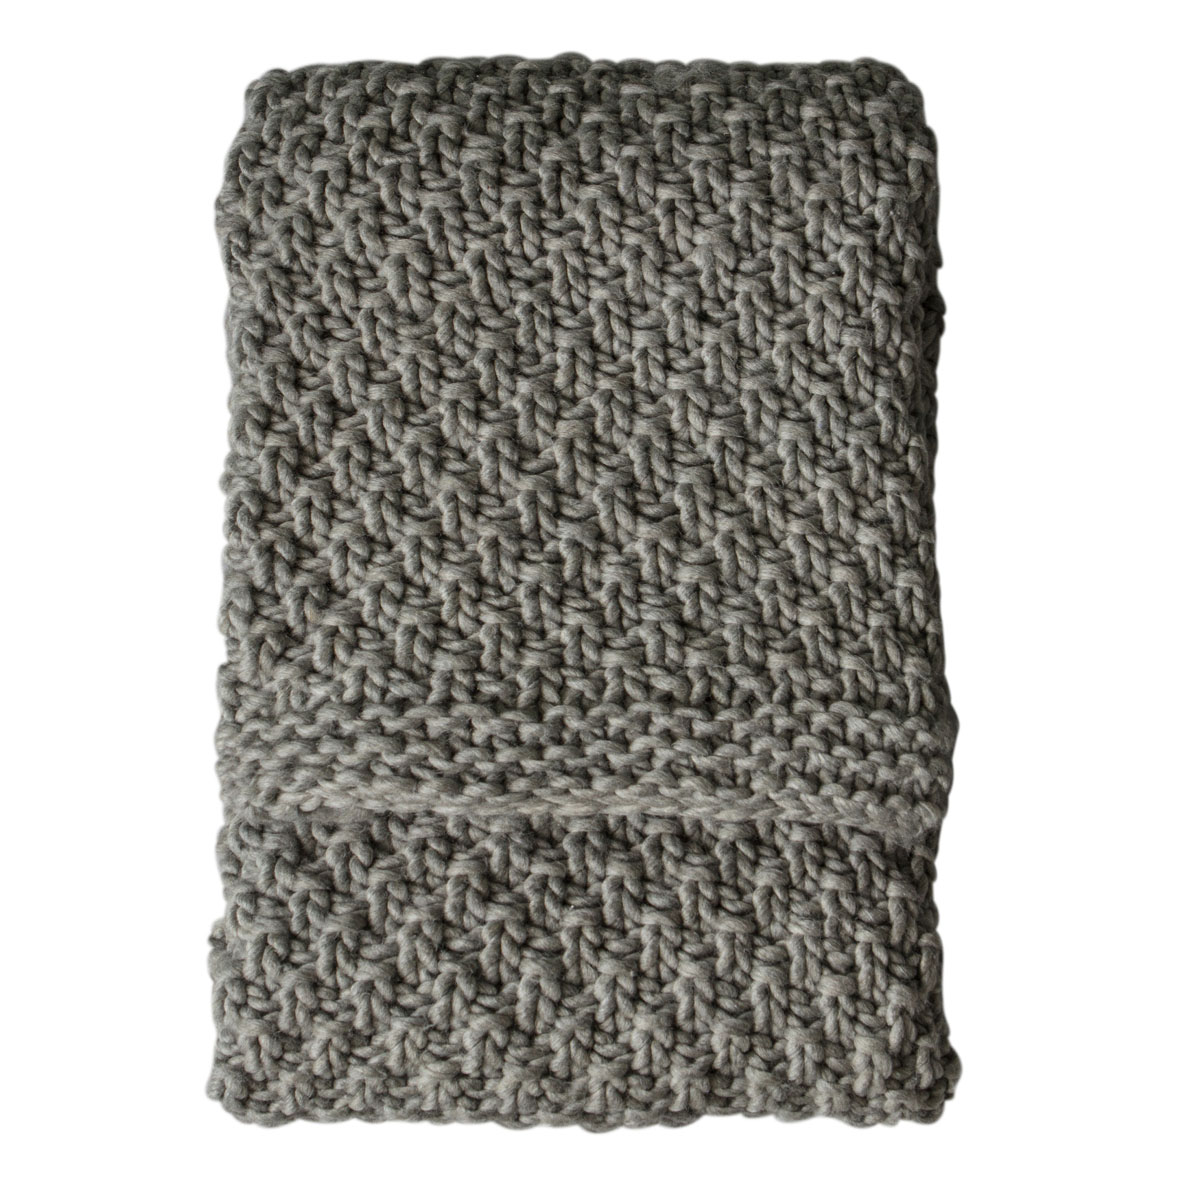 Moss Chunky Knitted Throw Grey 1300x1700mm